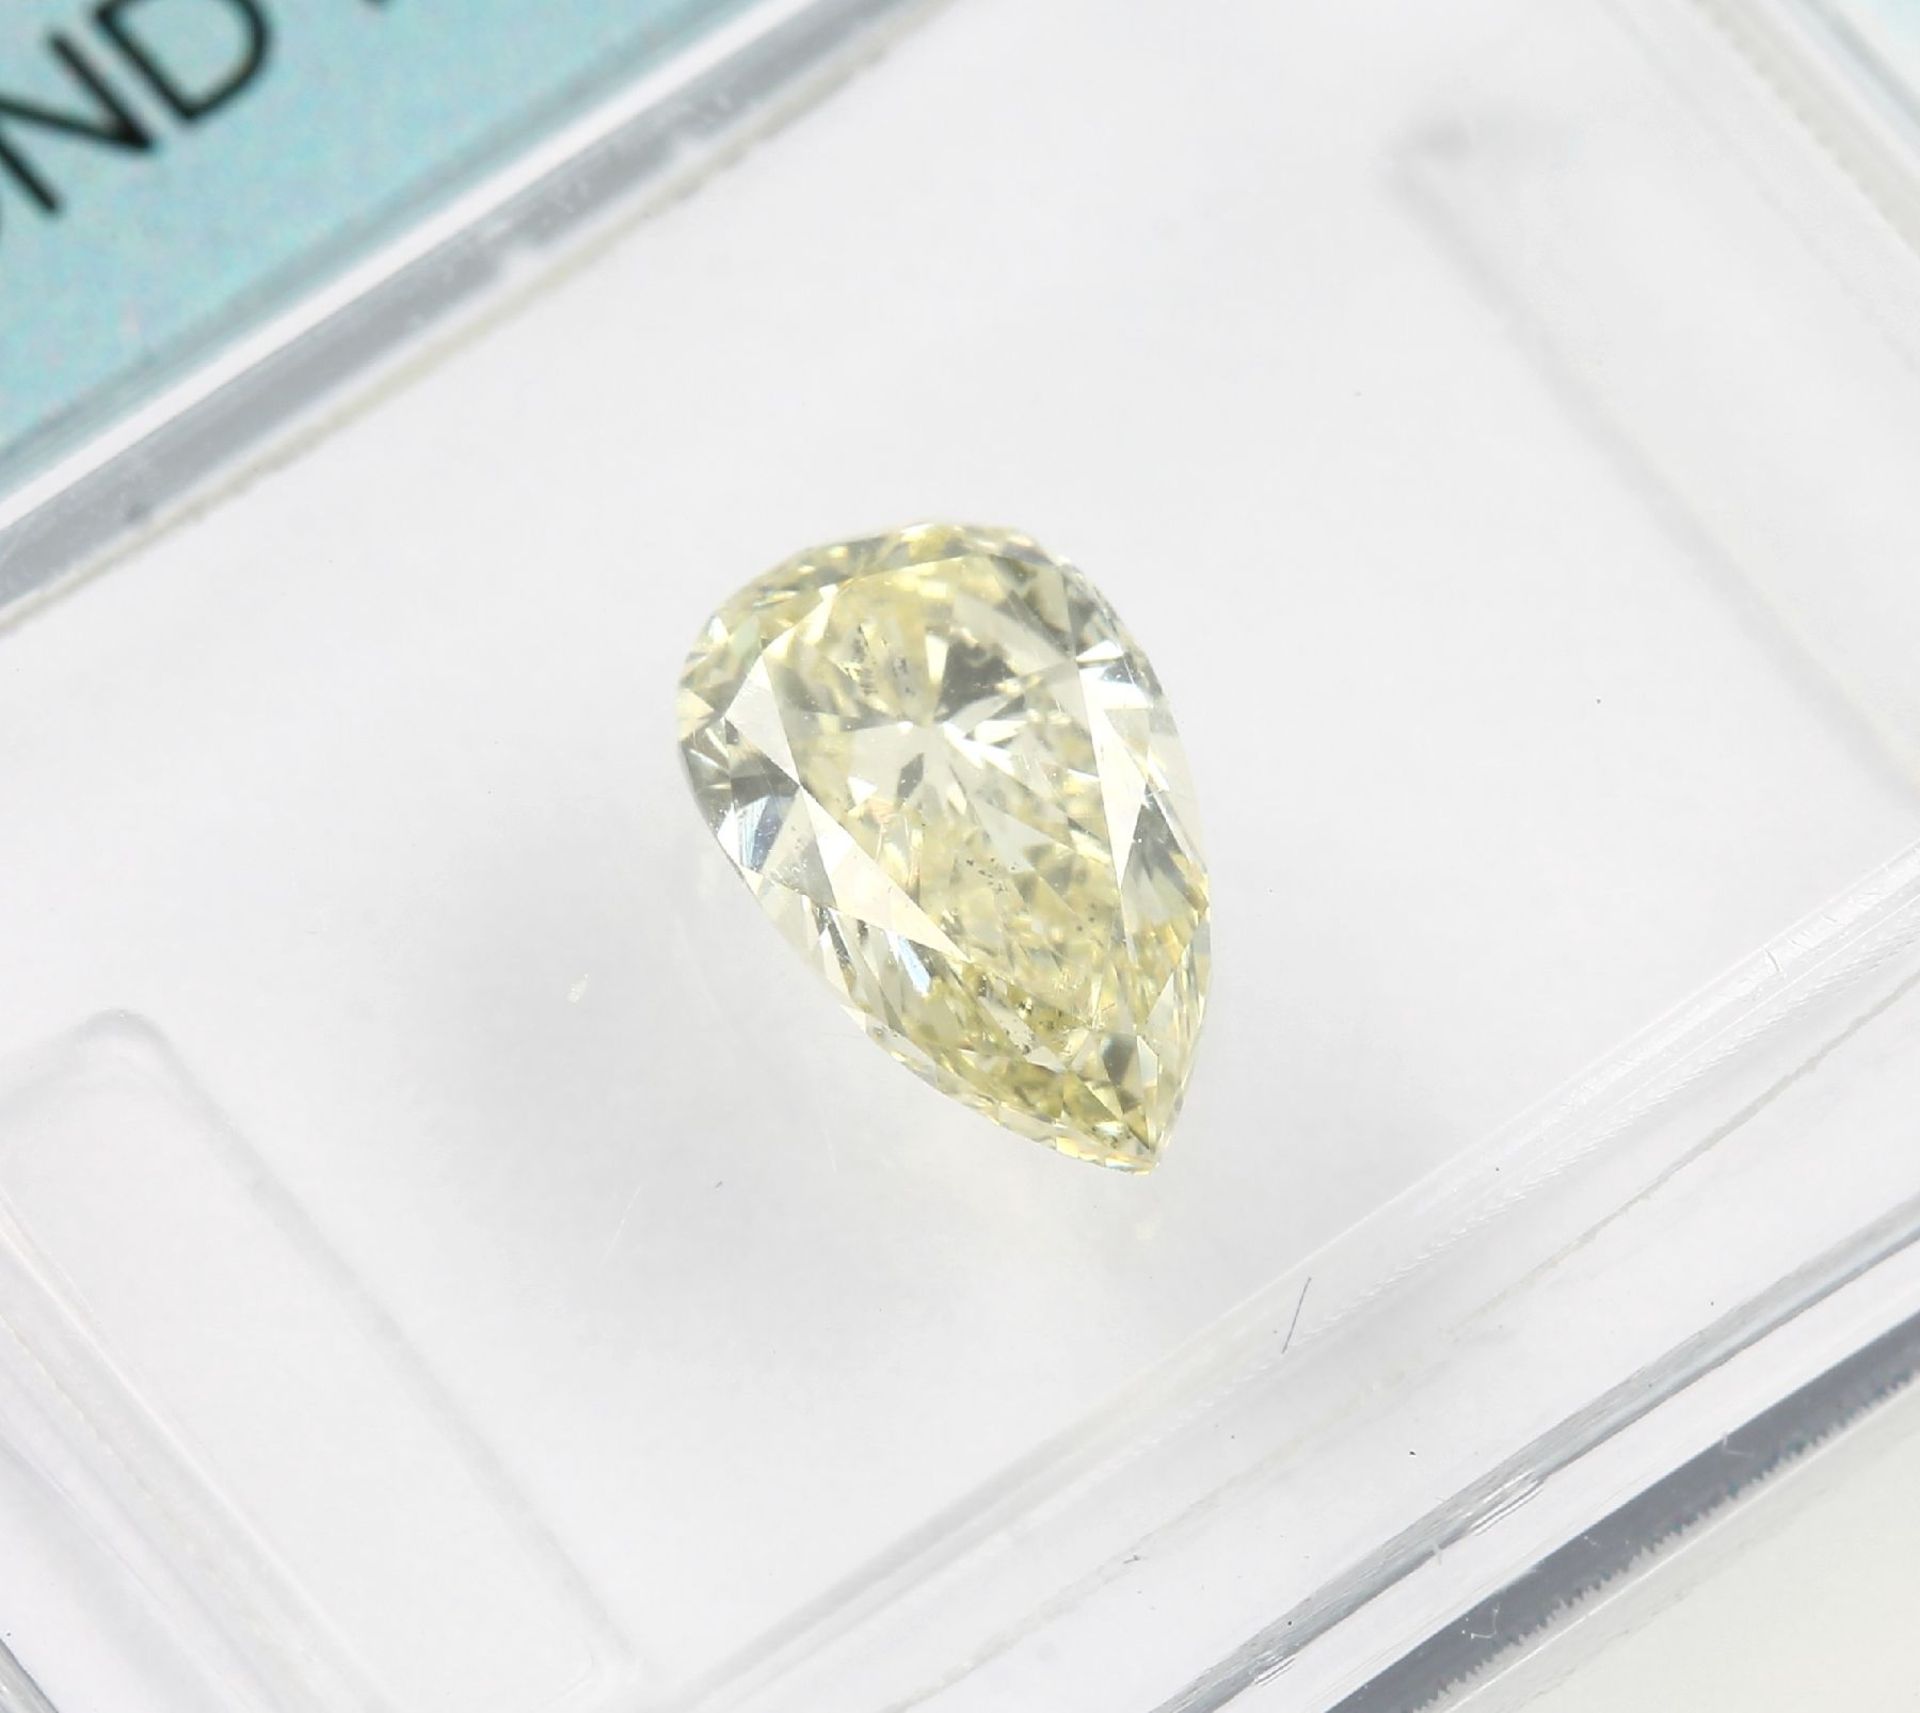 Loser Diamant, 0.93 ct Natural fancy yellow, tropfenf. - Image 2 of 3